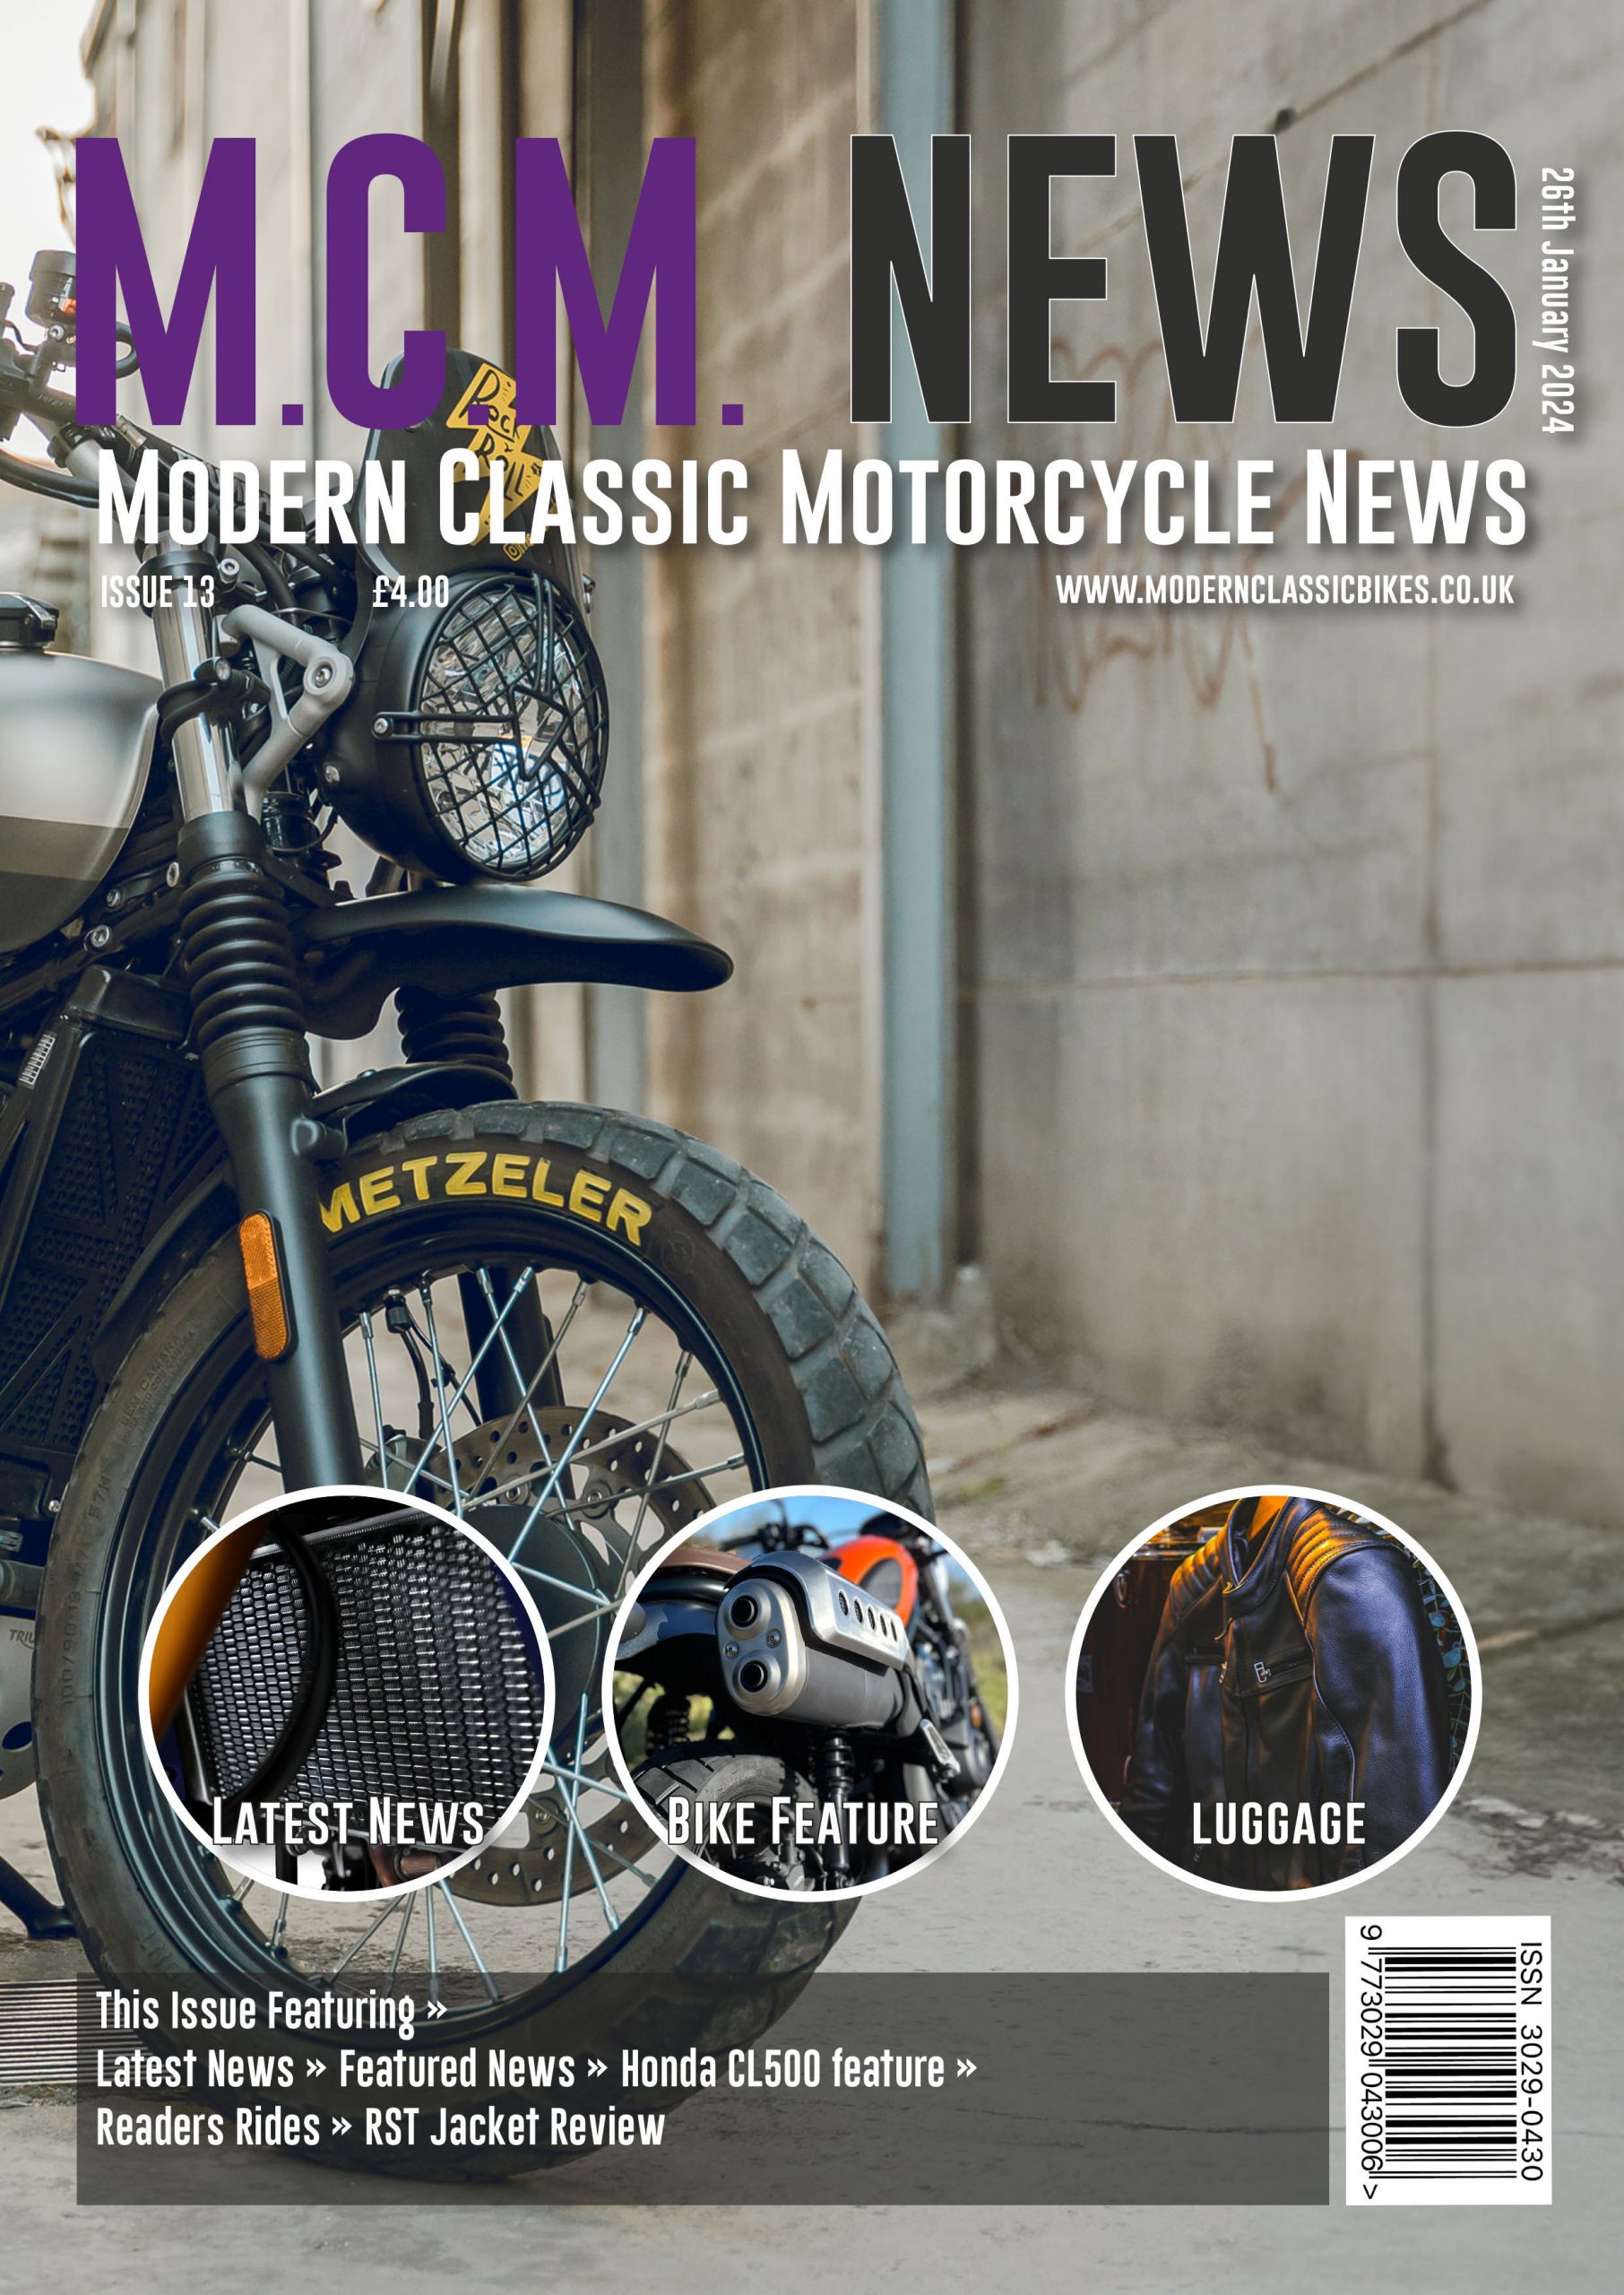 Secure Your Copy of Issue 13 – Modern Classic Motorcycle News by Pre-Ordering